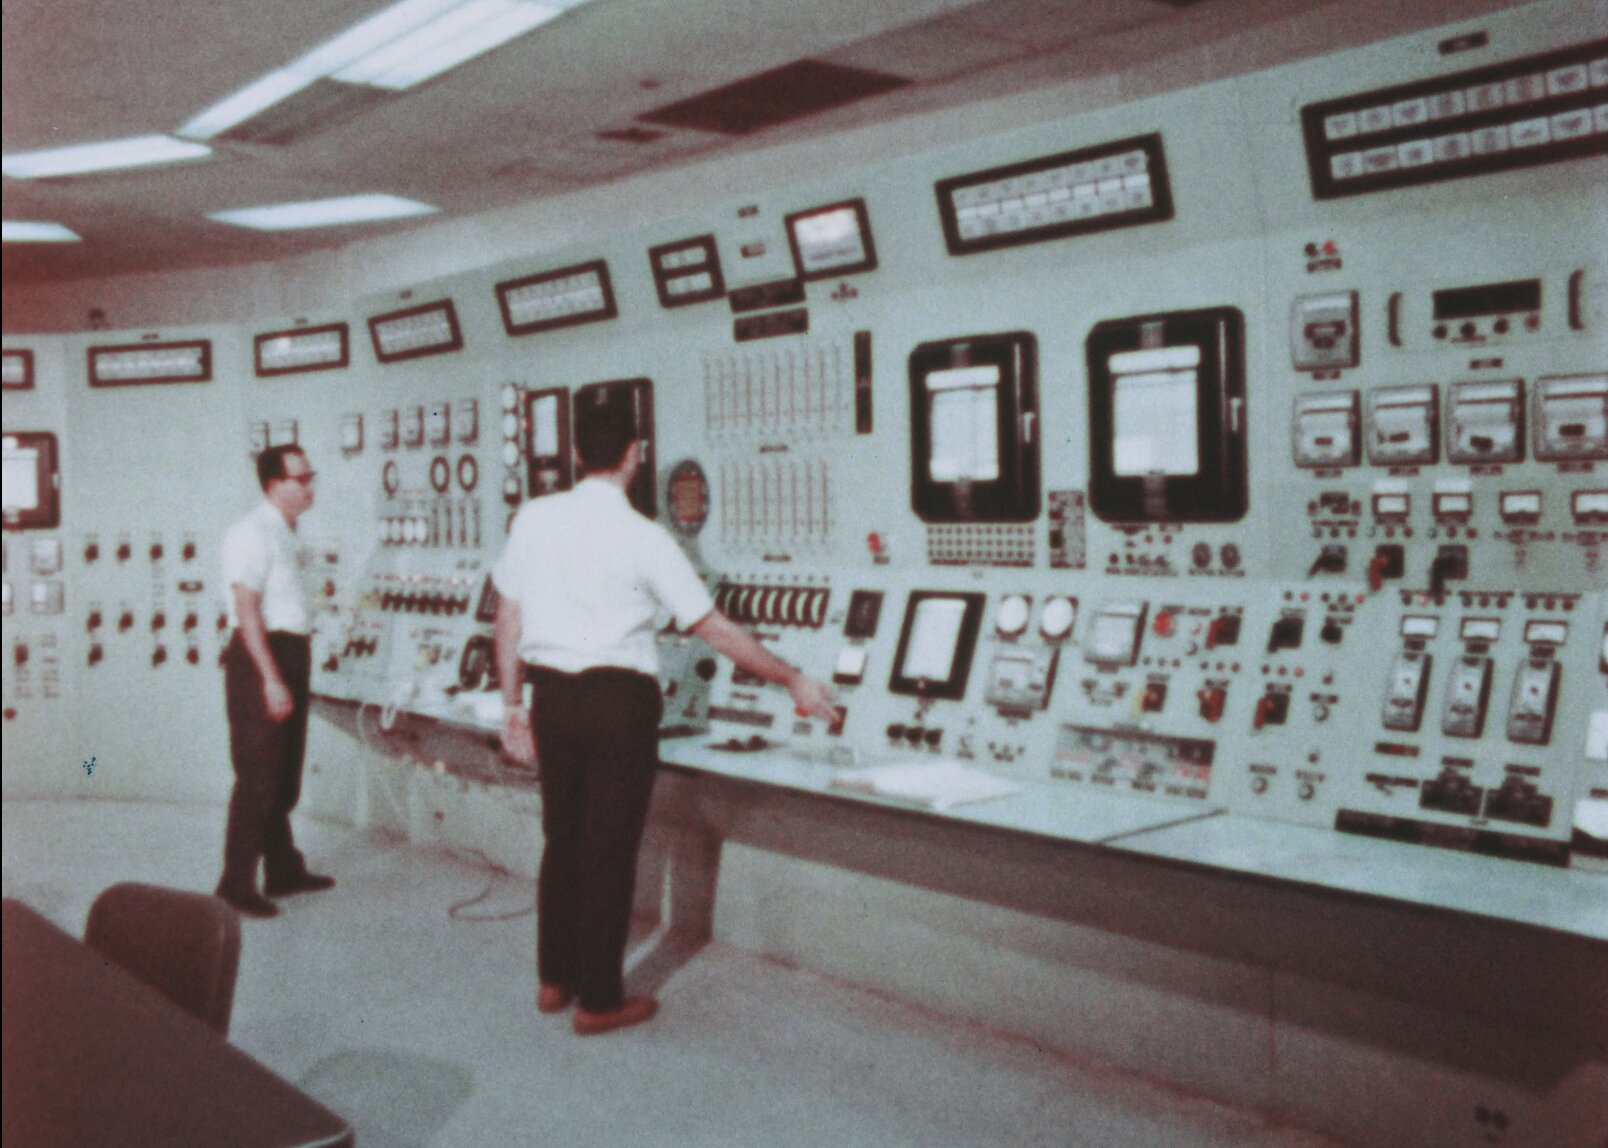 2 Men standing in bonus control room pressing buttons. The overview of the control room is visible in pale green with many indicators, switchces, and buttons, and alarms seen.